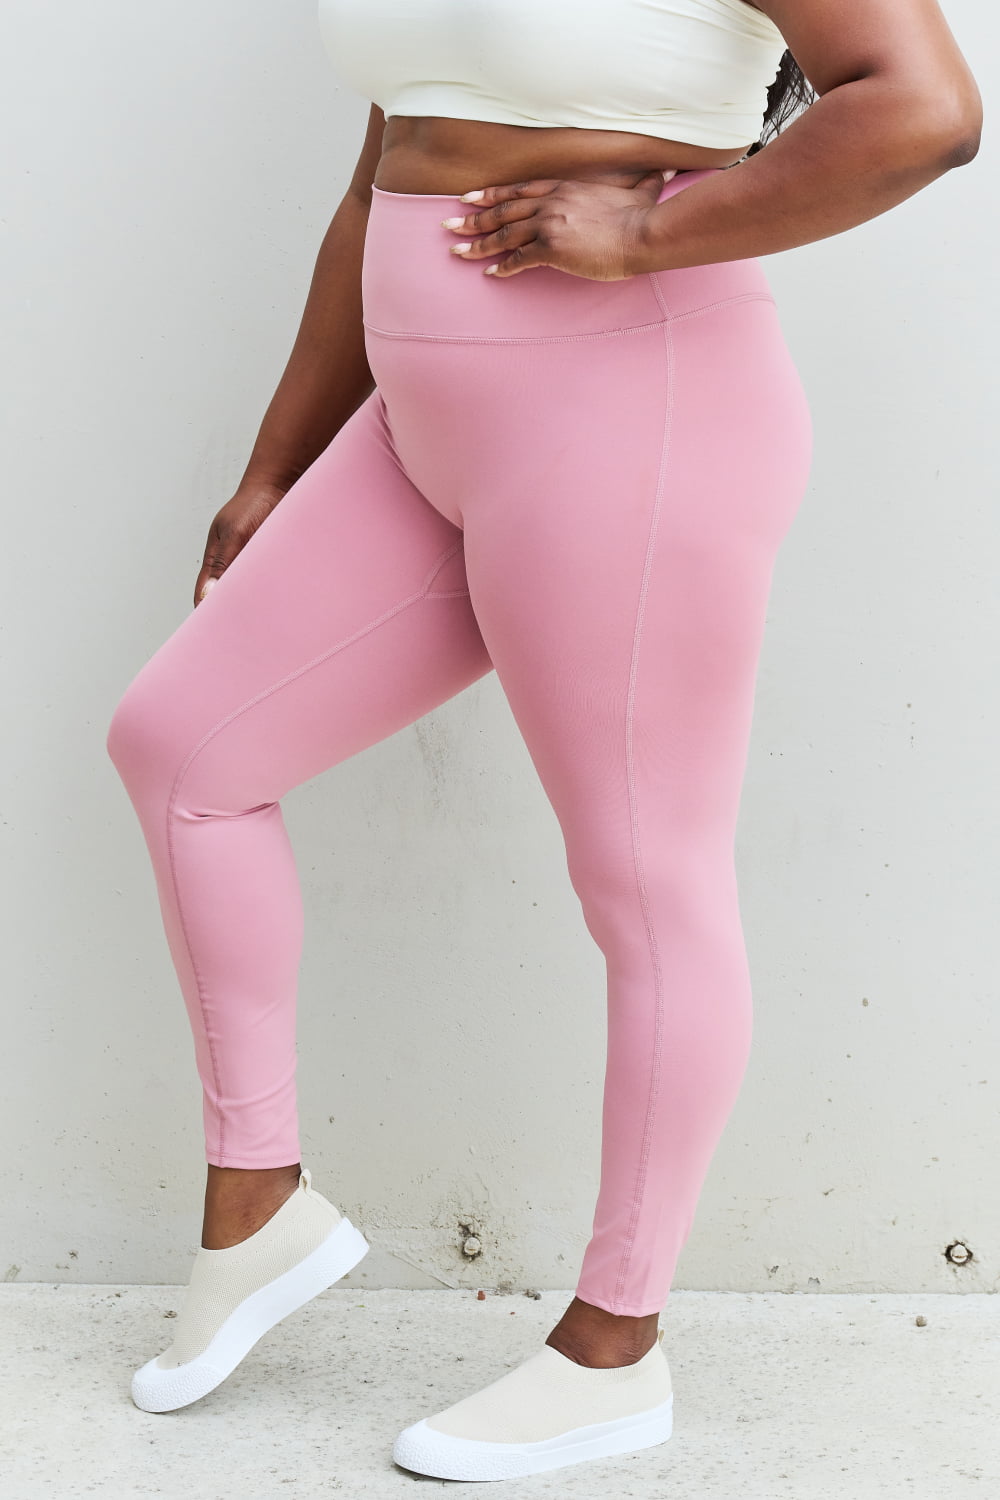 Fit For You Full Size High Waist Active Leggings in Light Rose - Women’s Clothing & Accessories - Activewear - 9 - 2024